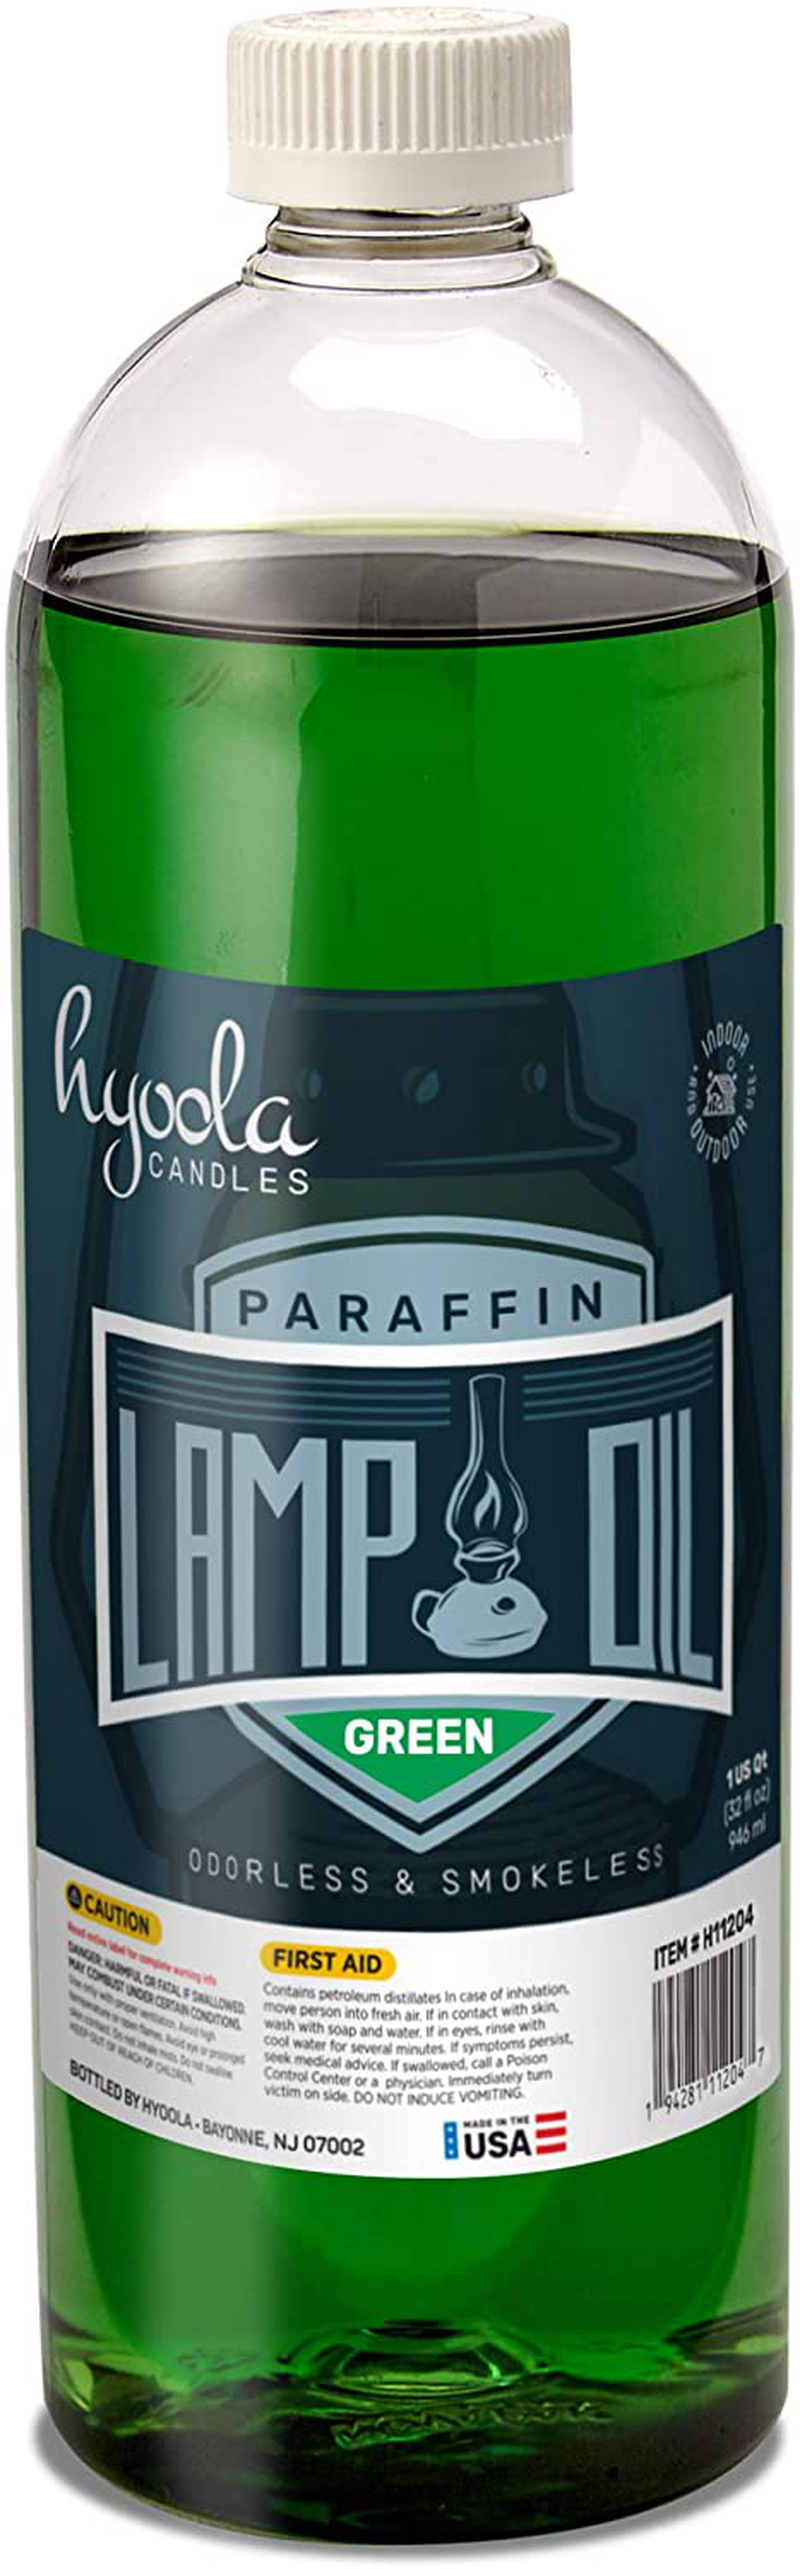 Hyoola Candles Liquid Paraffin Lamp Oil - Green Smokeless, Odorless, Ultra Clean Burning Fuel for Indoor and Outdoor Use - Highest Purity Available - 32oz Home & Garden > Lighting Accessories > Oil Lamp Fuel Hyoola Default Title  